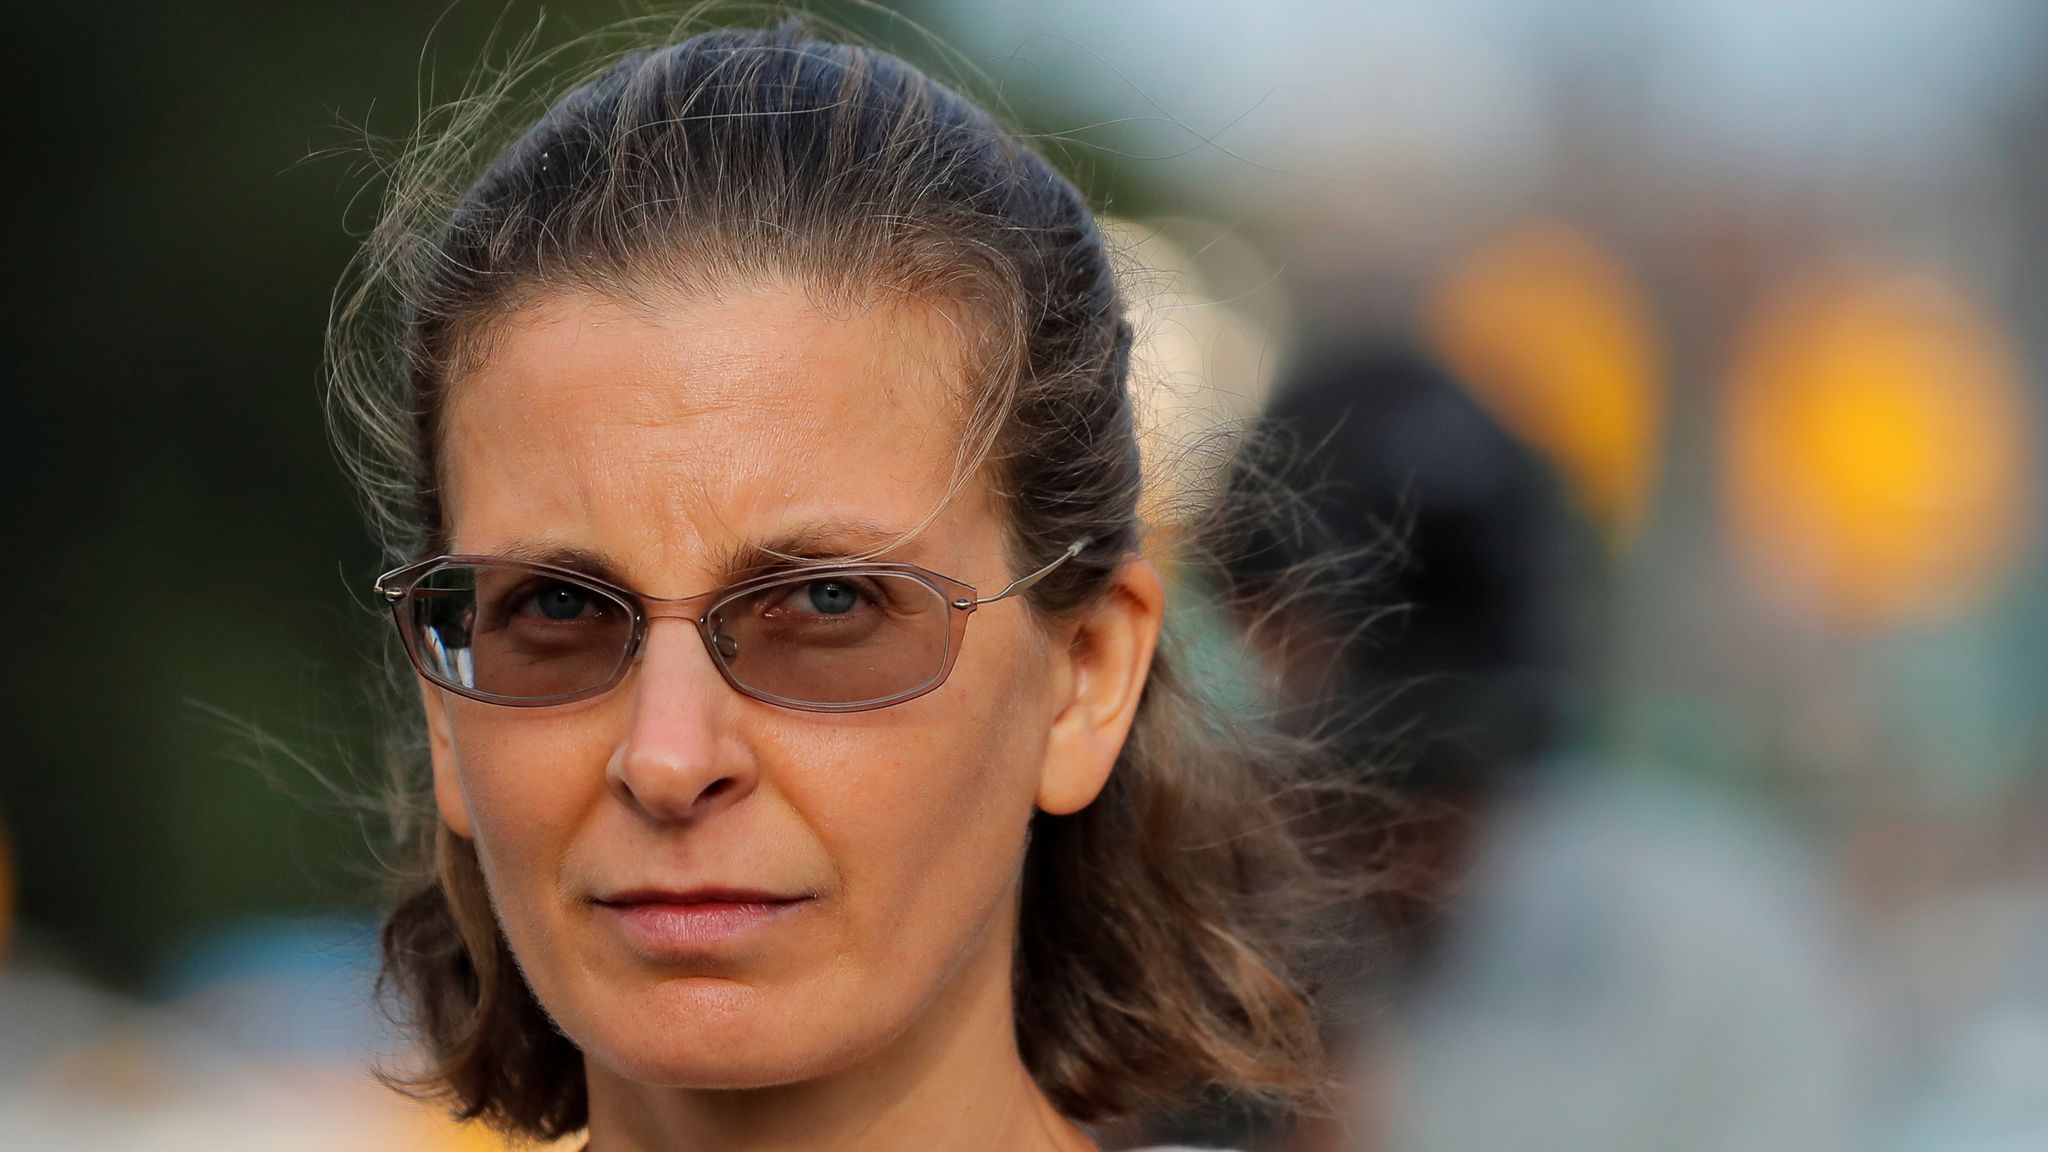 Seagram Heiress Clare Bronfman Jailed For Six Years Over Role In Nxivm Sex Slaves Cult Us News 9828